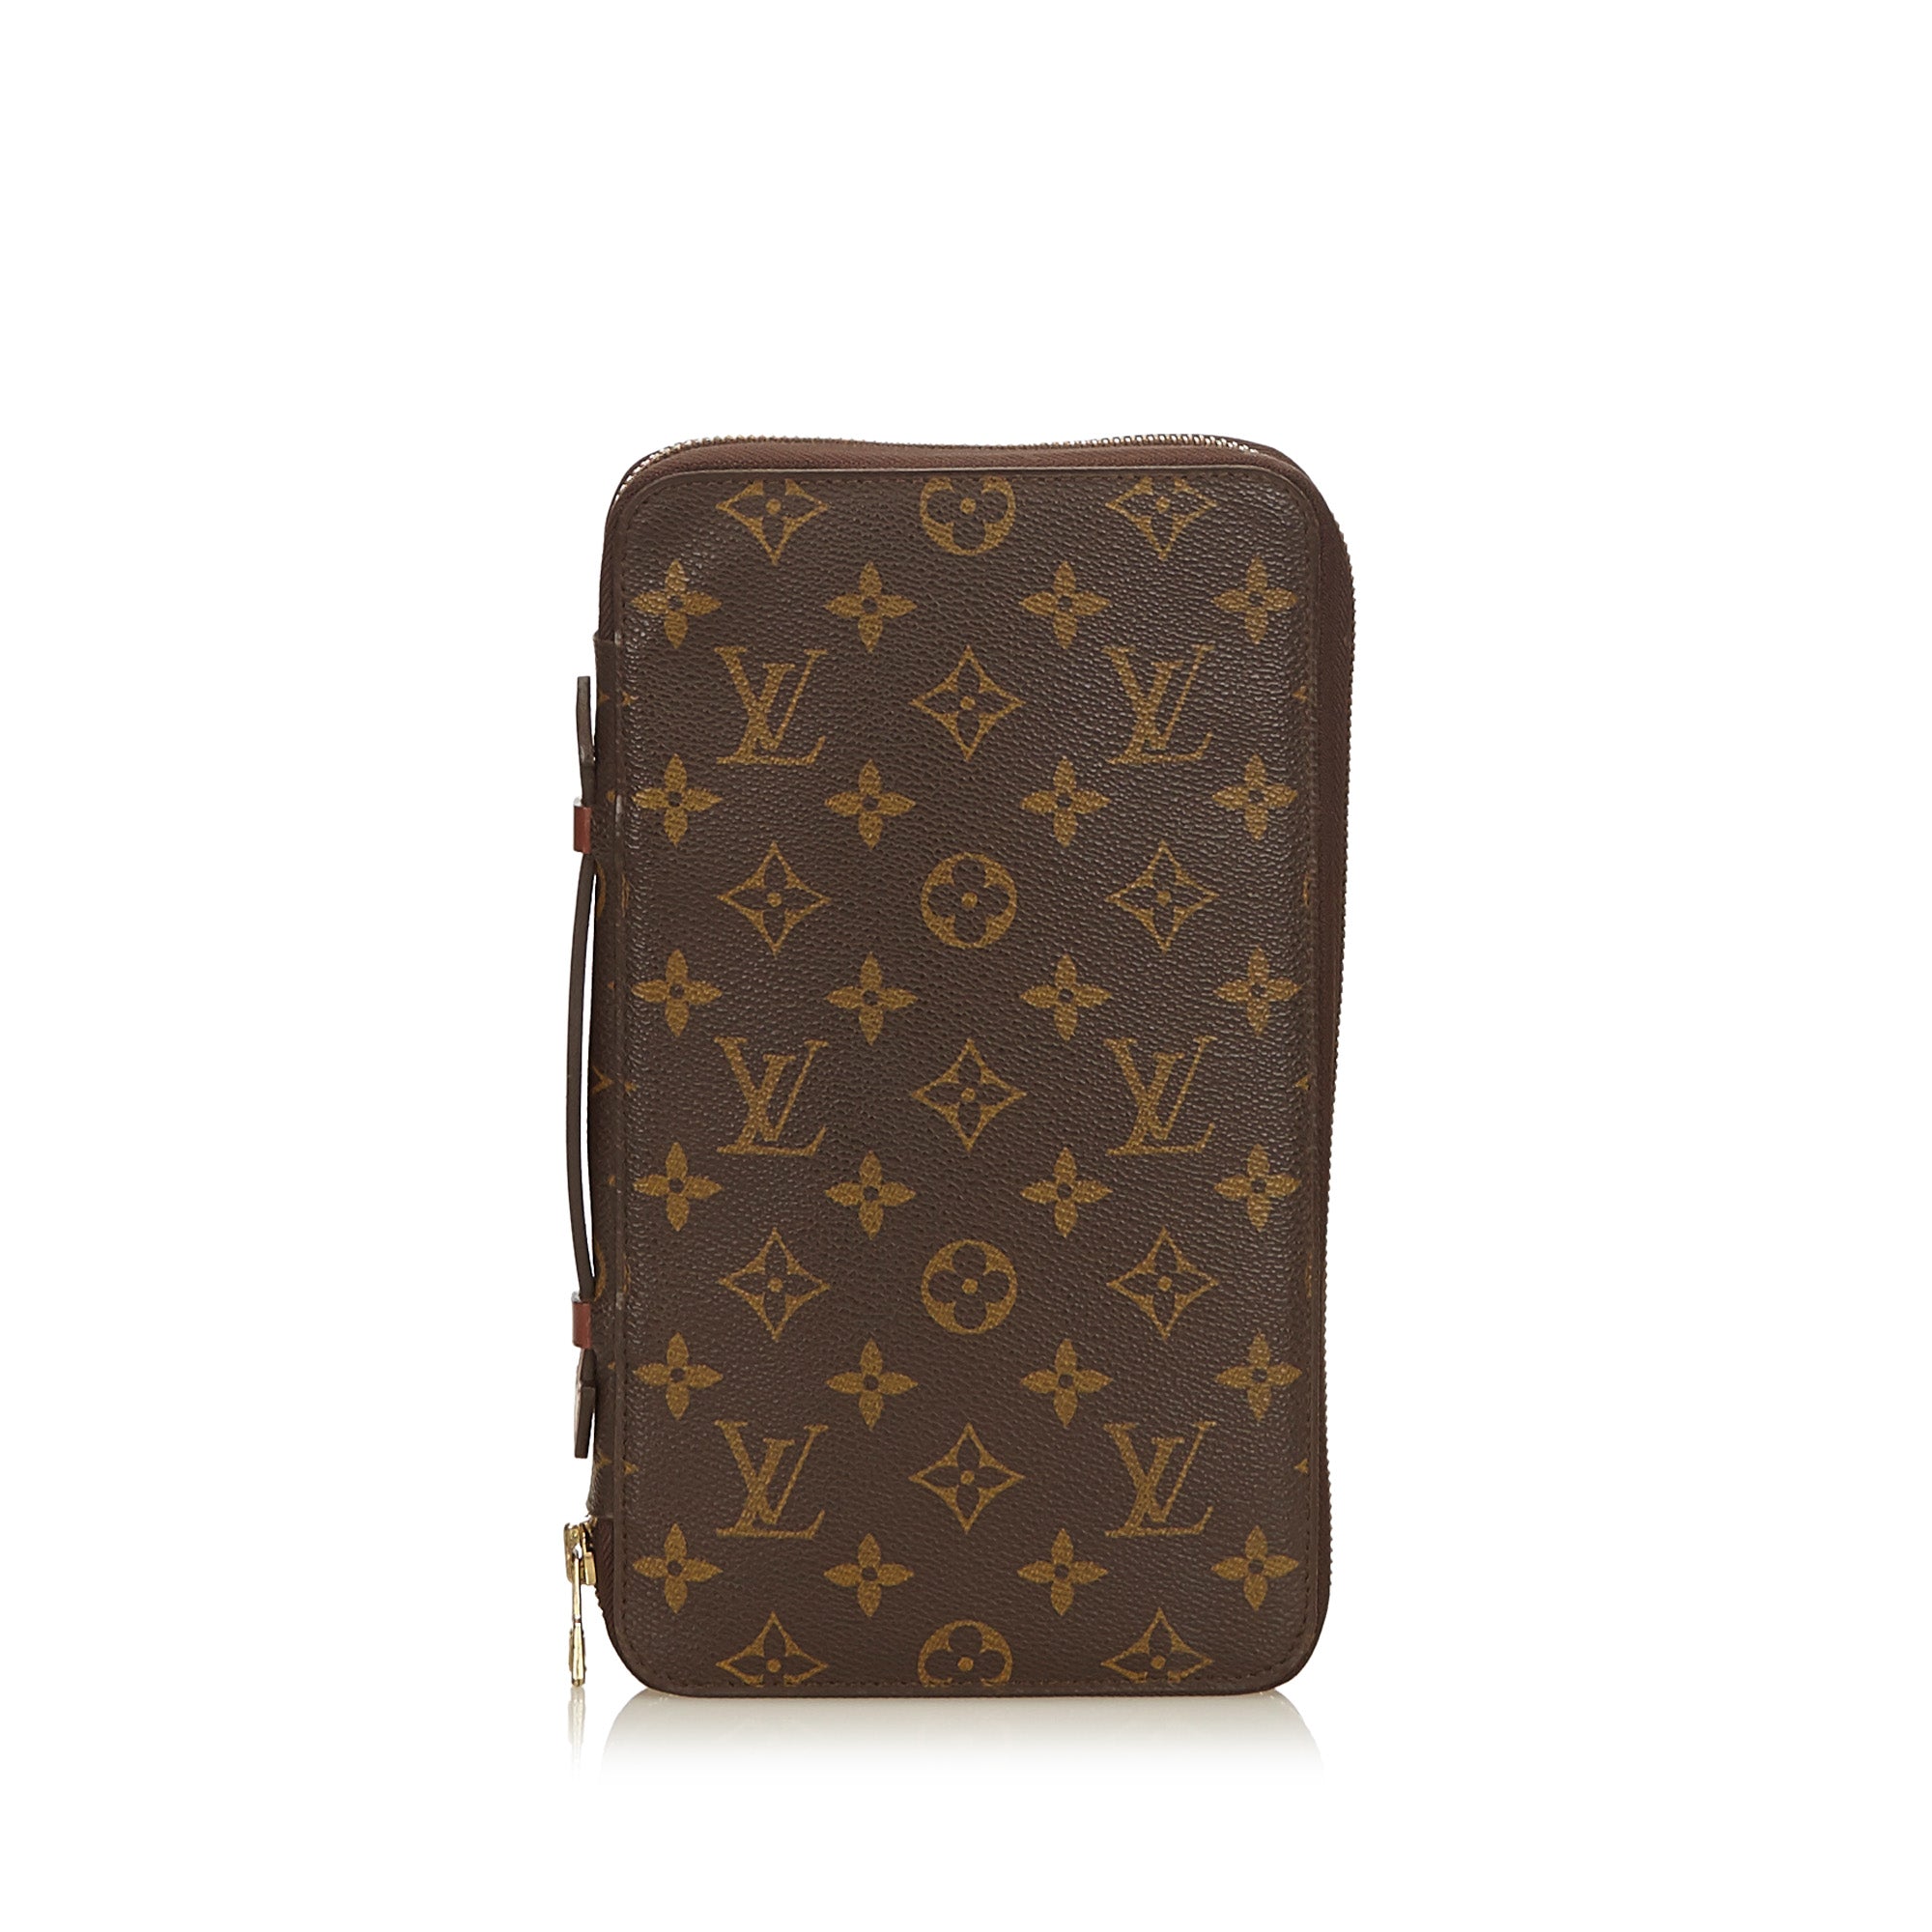 LOUIS VUITTON Daily organizer travel case clutch bag  M61452_Wallet_Product_Be Brand